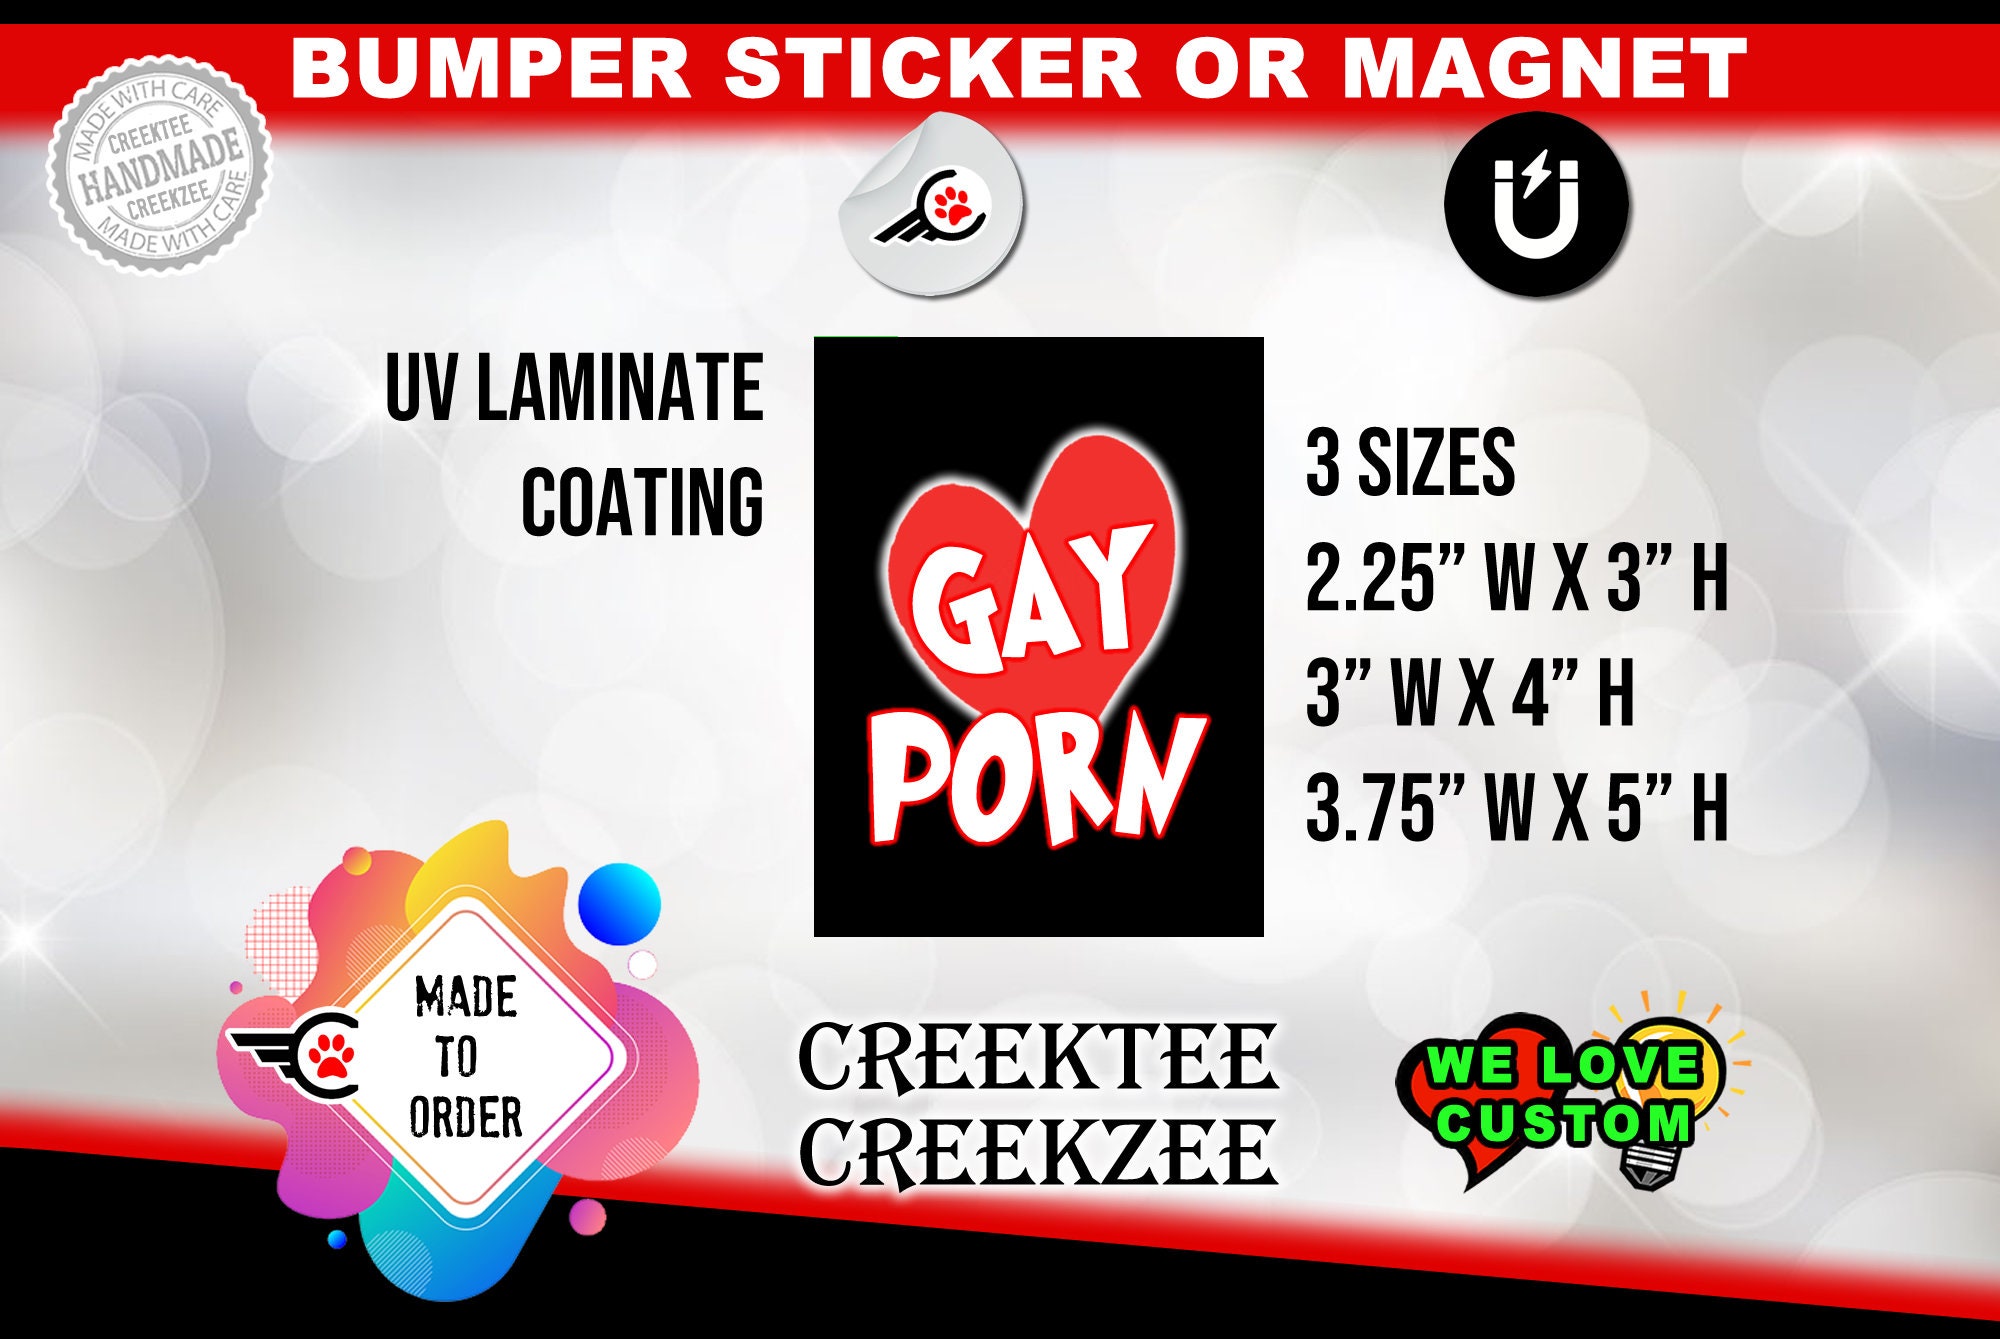 I Love Gay Porn in 3 sizes portrait style - Vinyl Sticker or Magnet coated in UV Laminate or optional 20mil magnet.